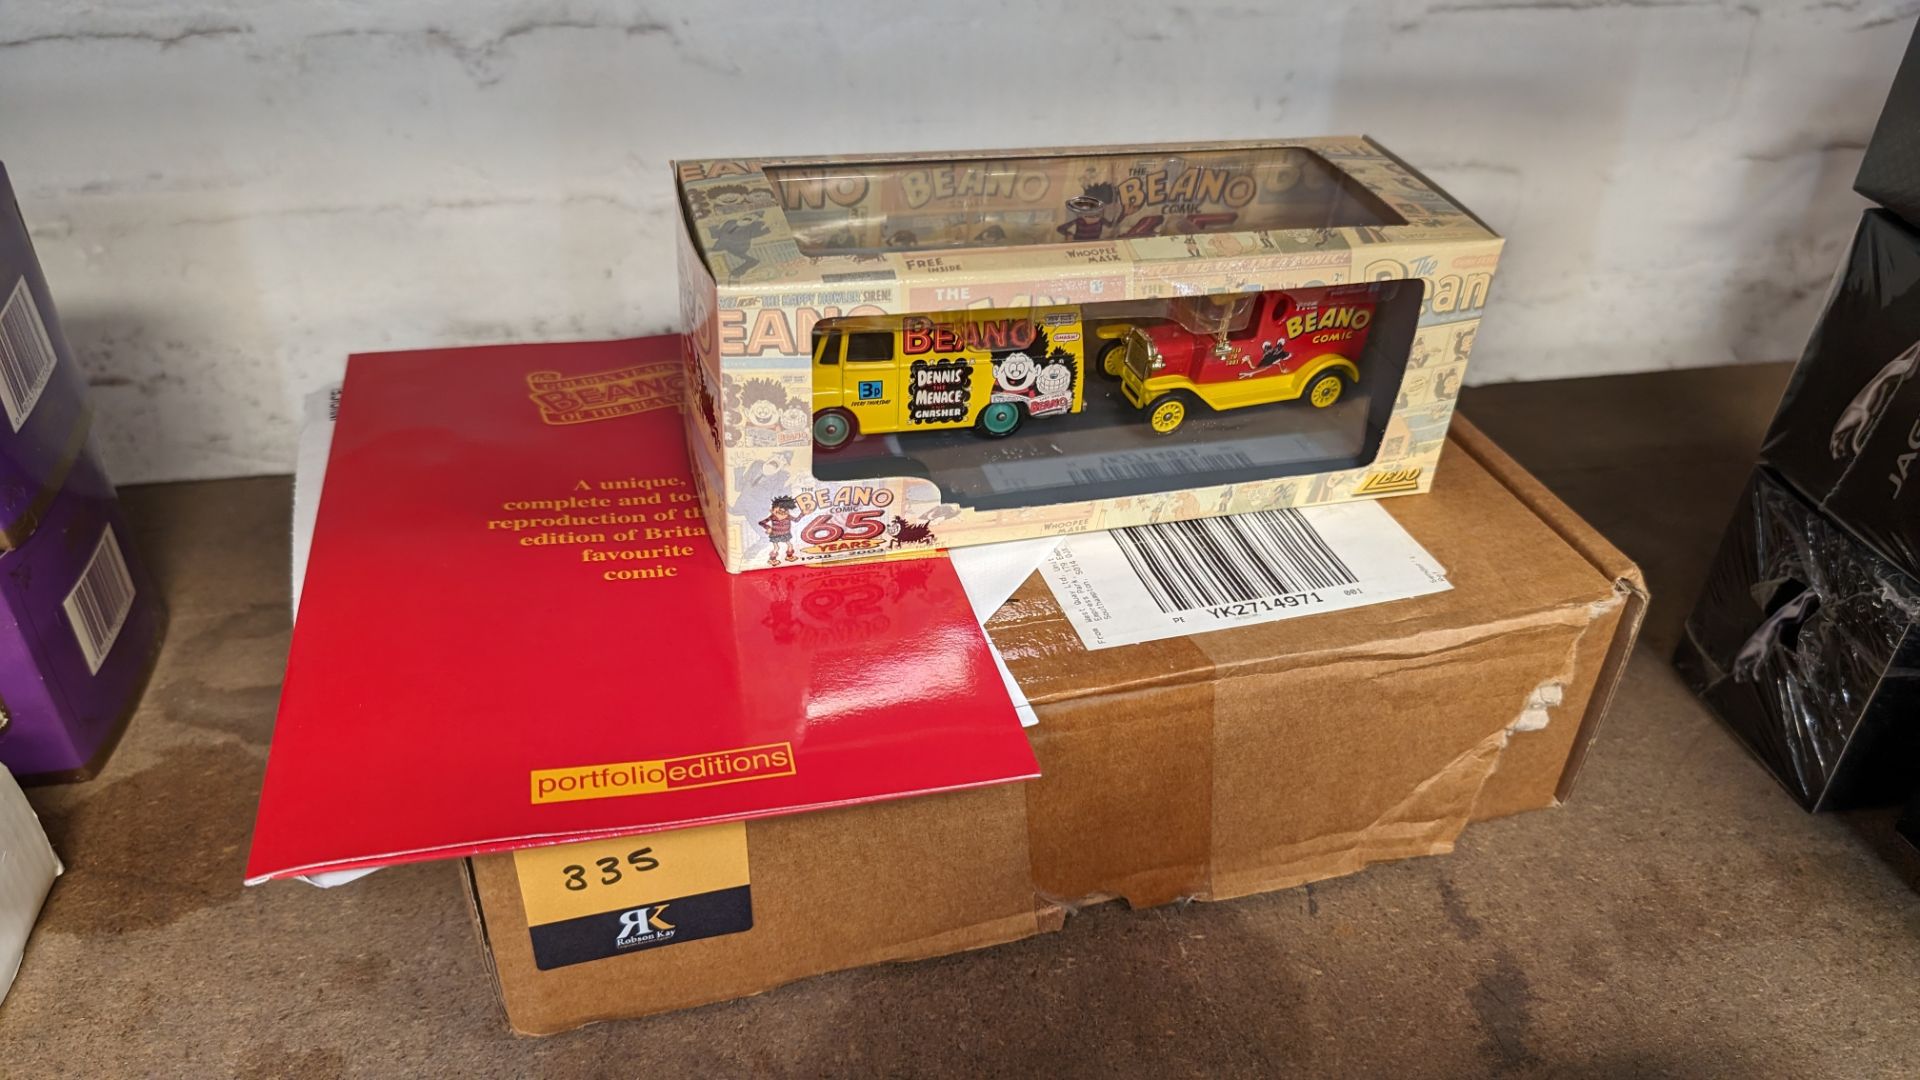 Beano 65th anniversary gift set including reproduction of the first edition of the comic plus 2 mode